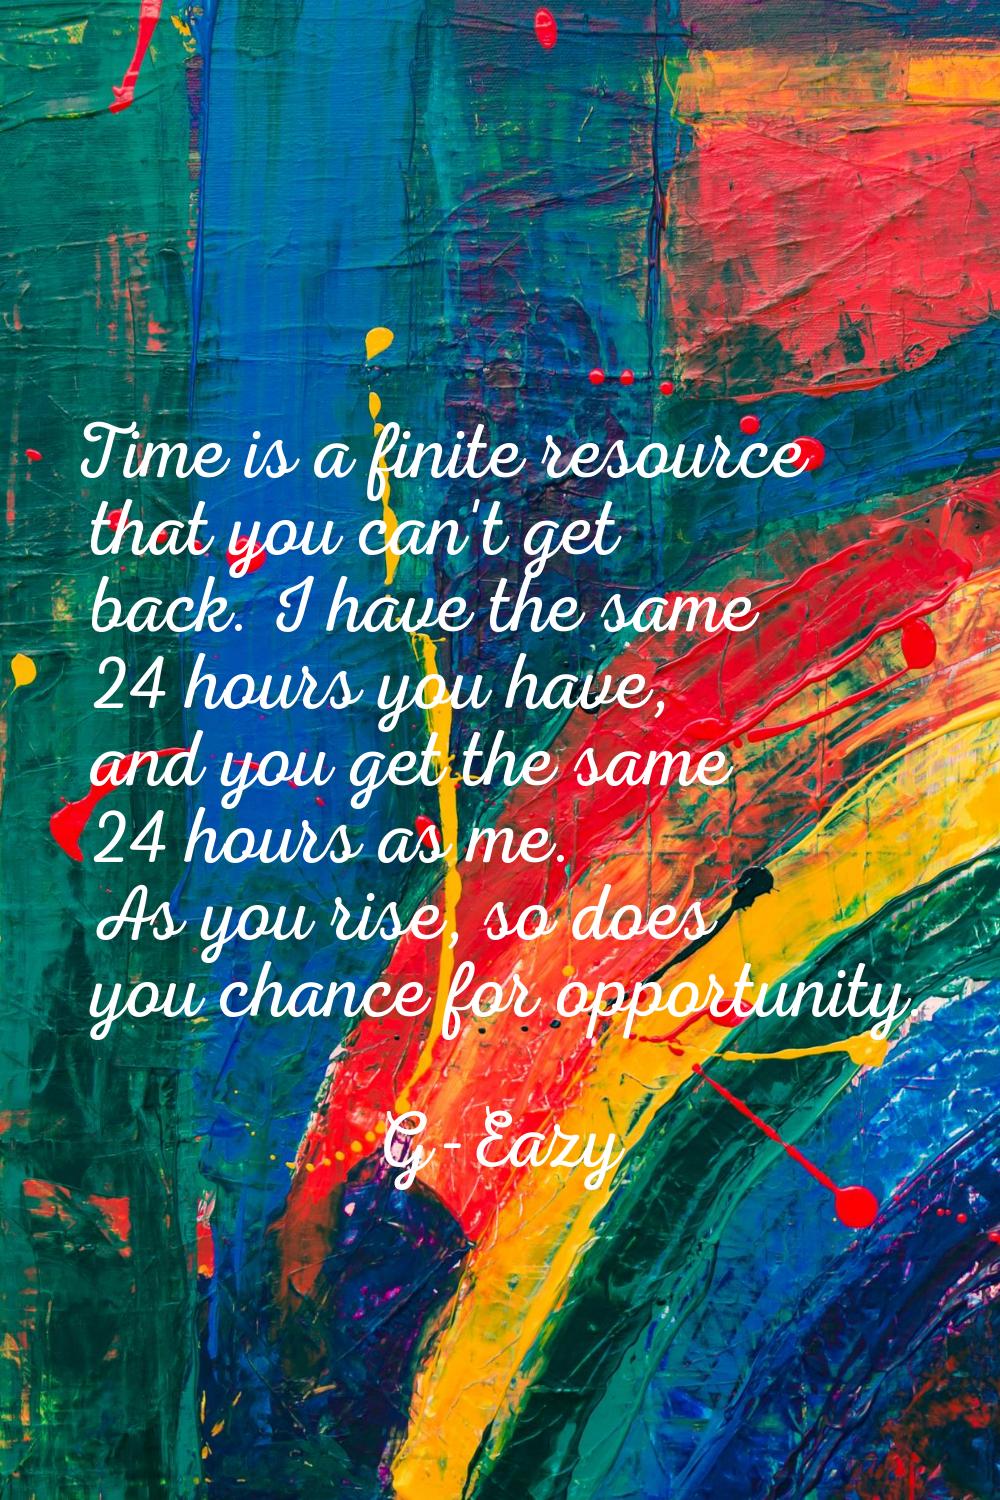 Time is a finite resource that you can't get back. I have the same 24 hours you have, and you get t